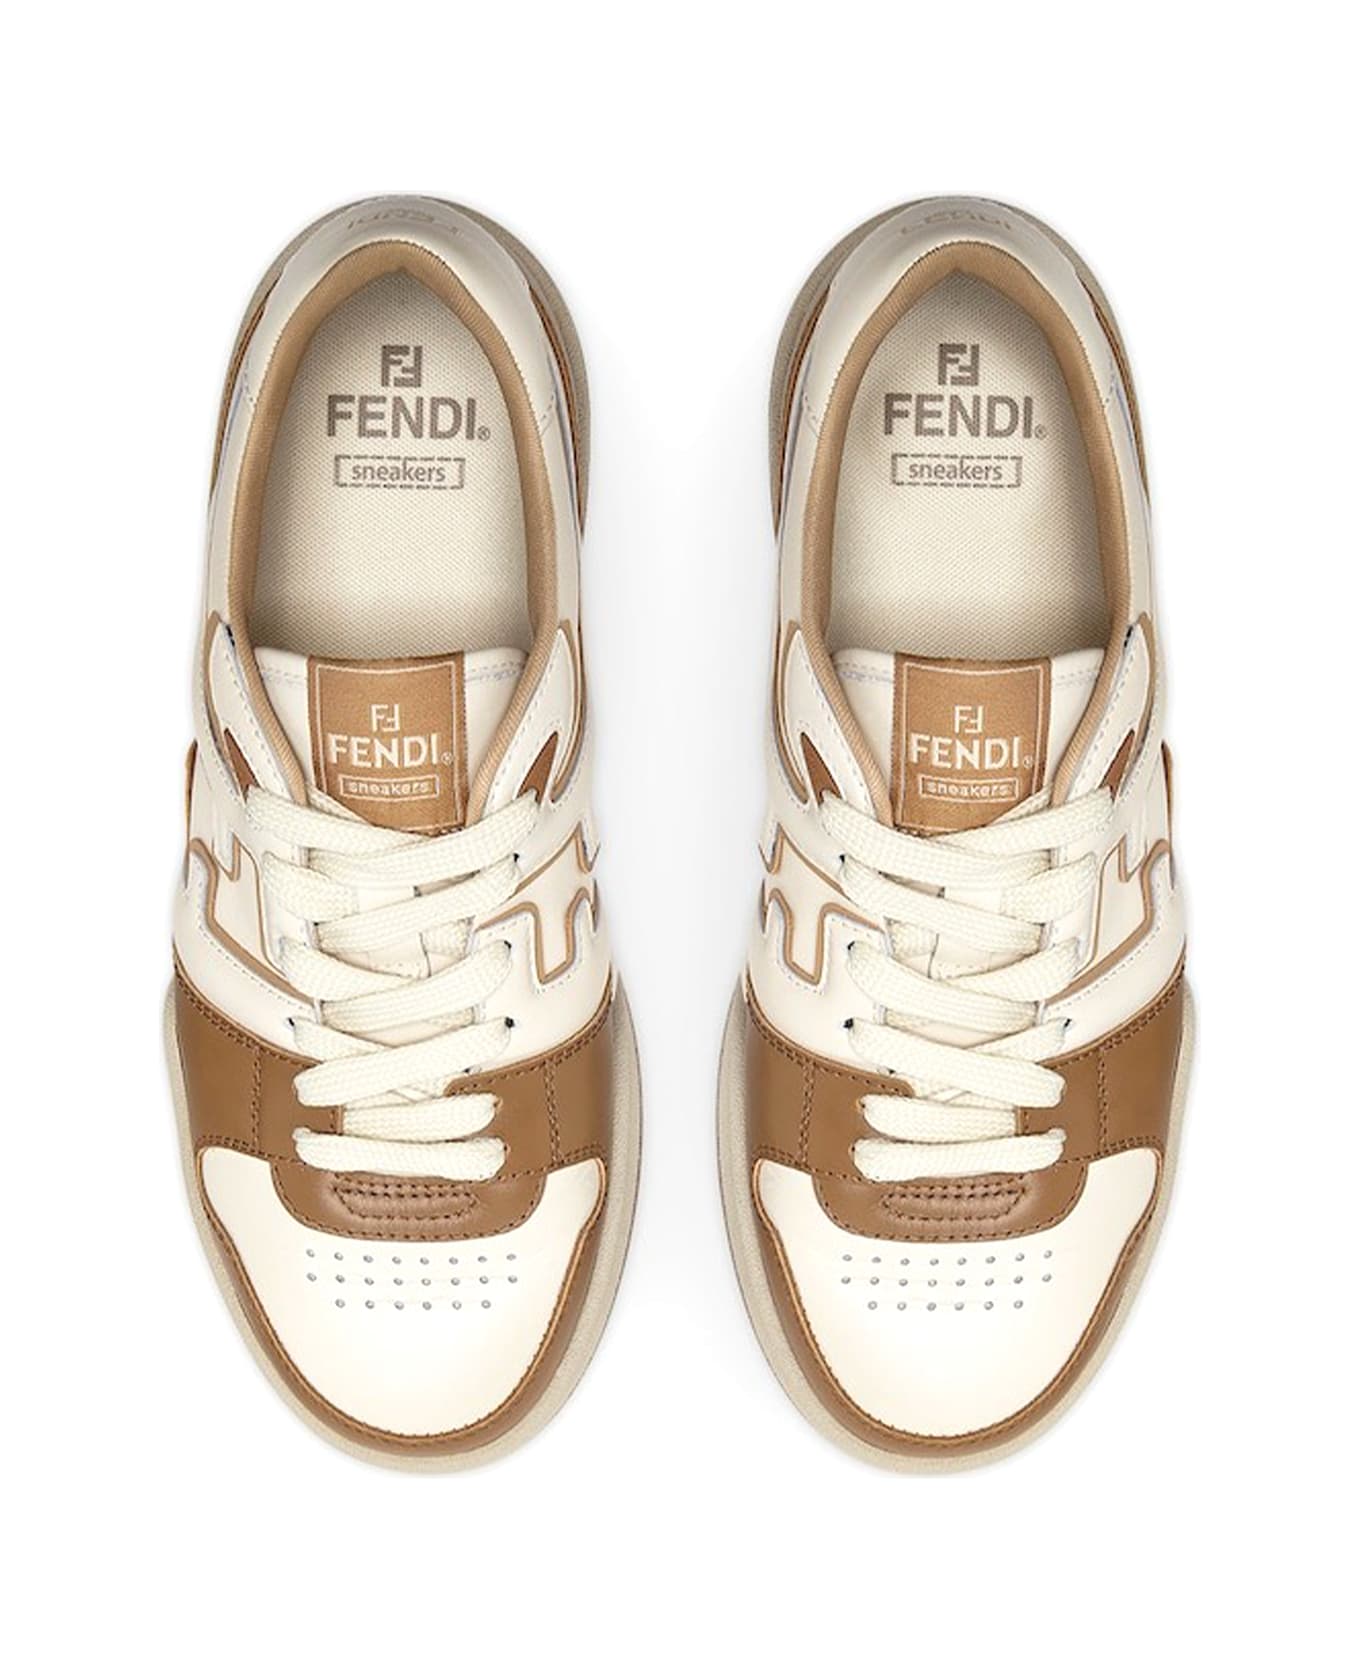 Fendi Low Top Sneaker In Brown Leather - NOCCIOLA BIANCO MOU MOU スニーカー